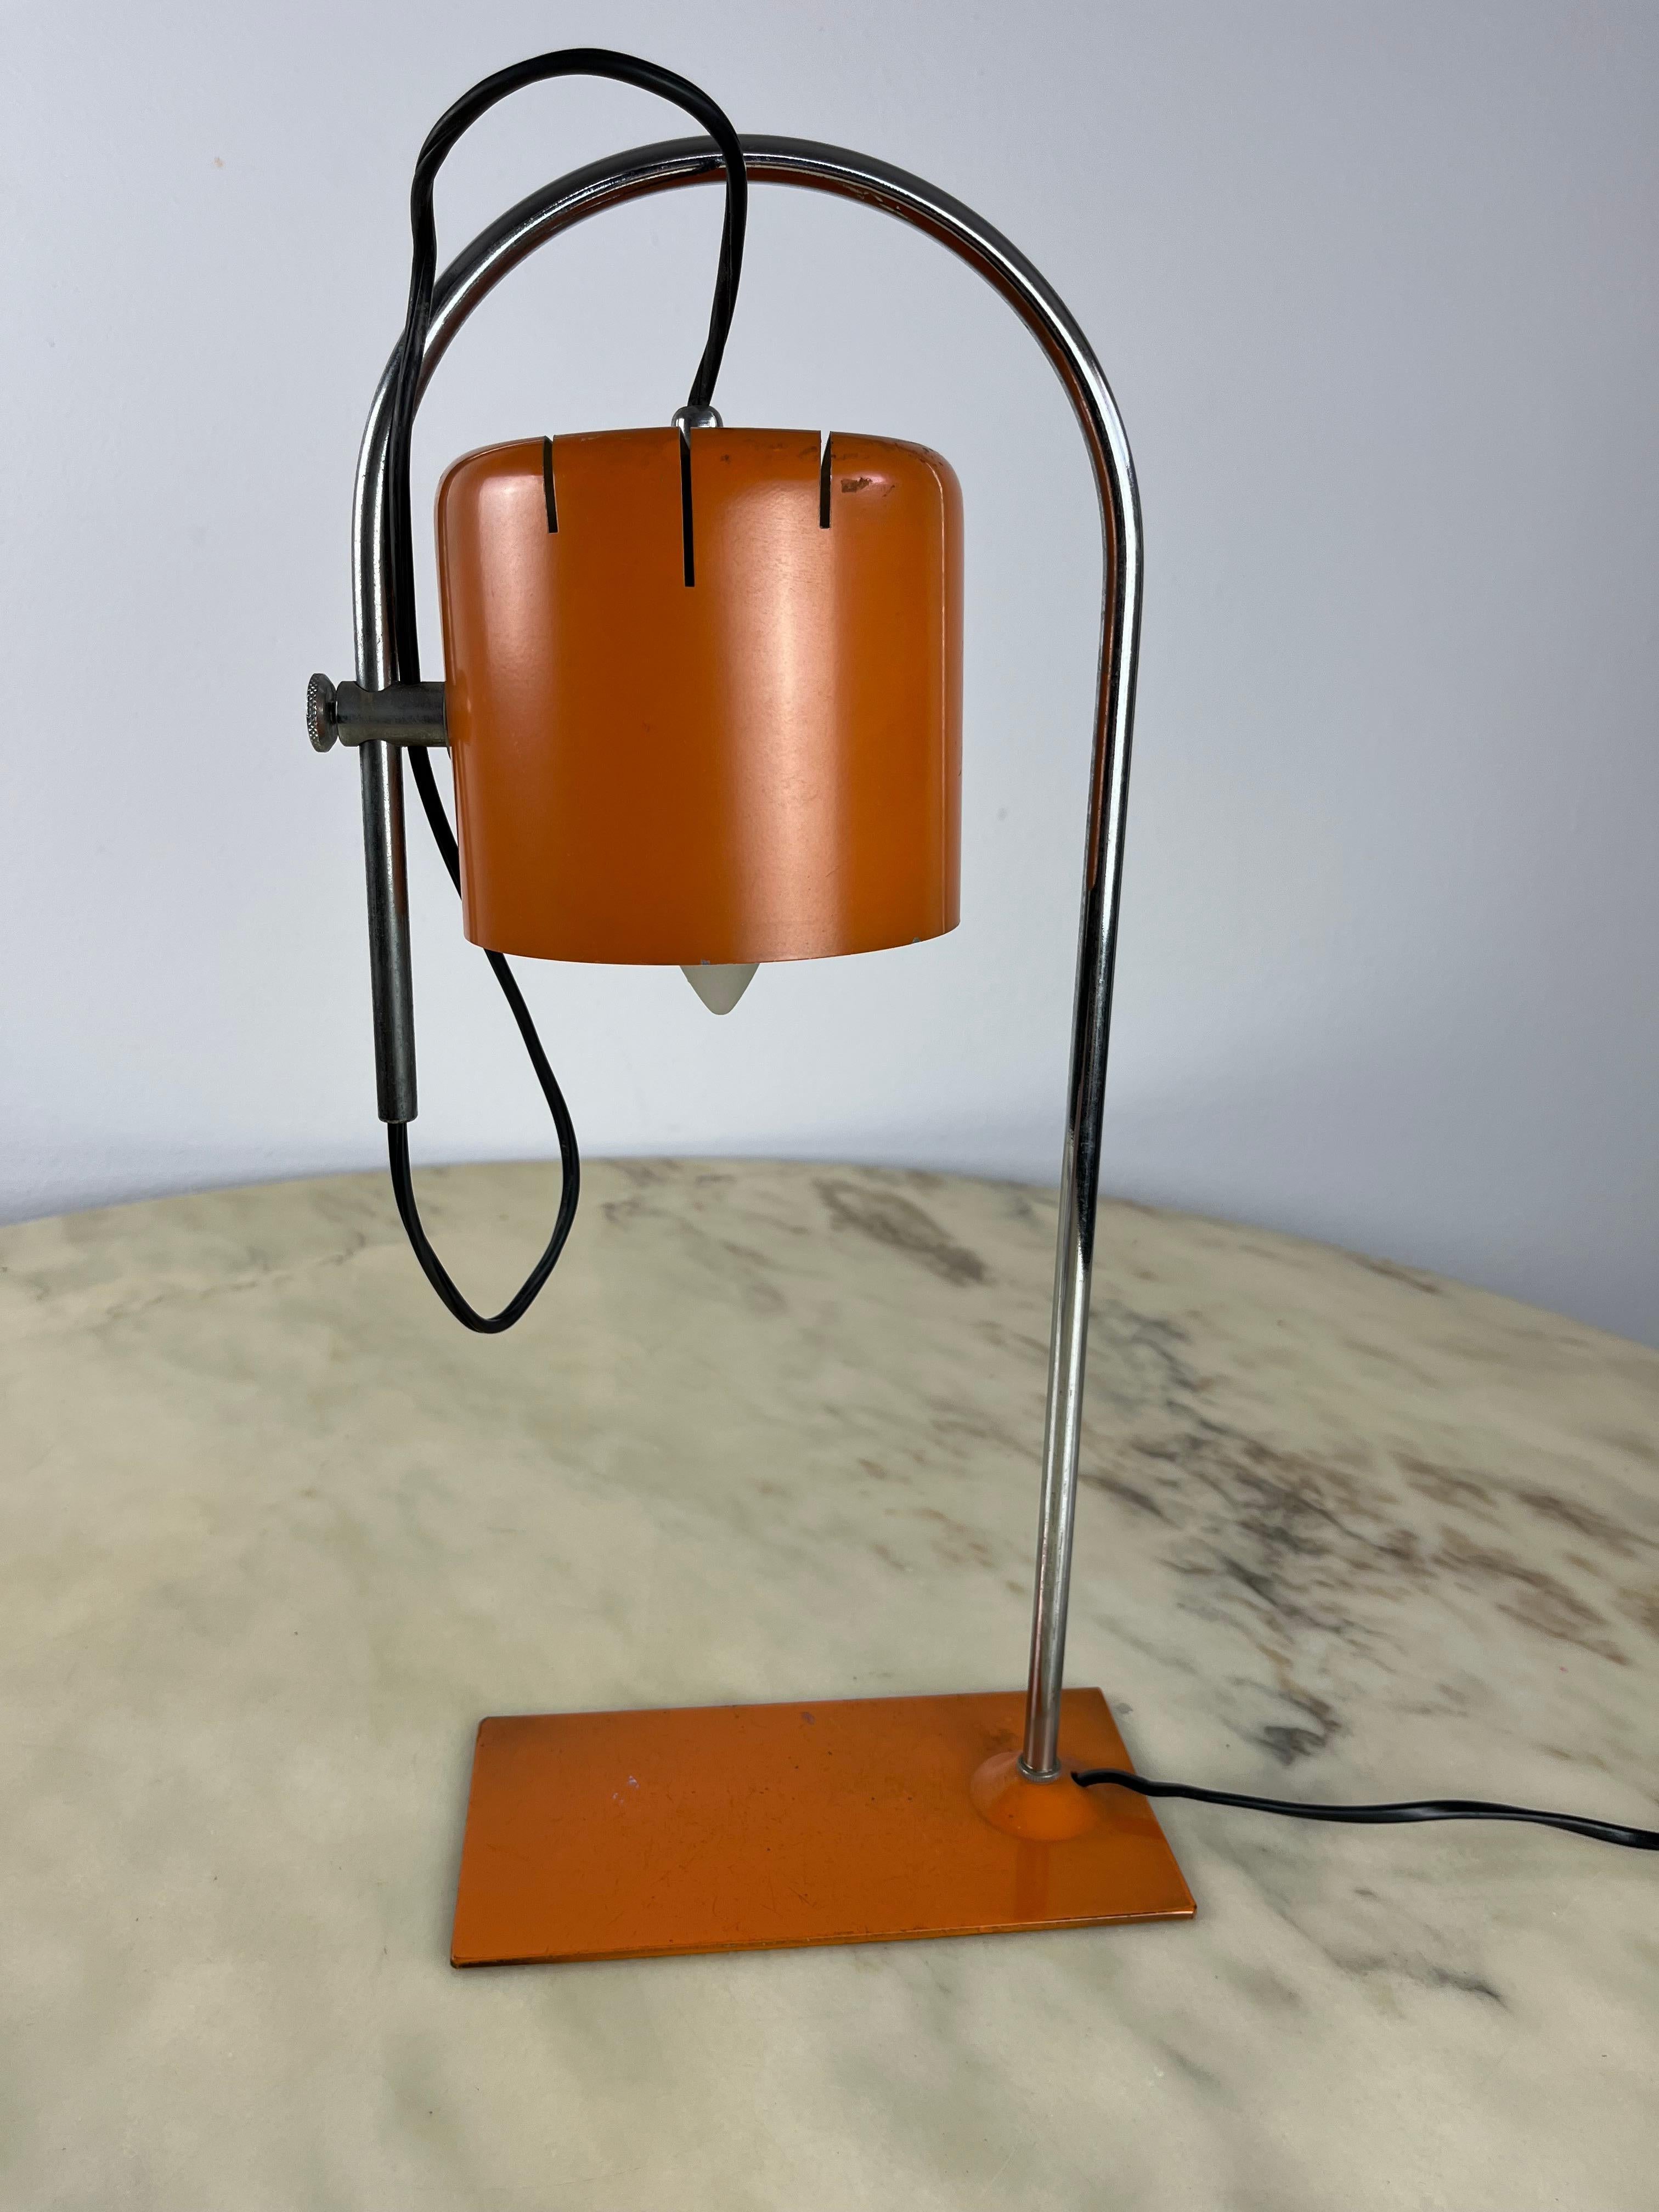 Vintage table lamp, Italy, 1981.
Adjustable, the ceiling light can be adjusted. In working order, small signs of age and use that do not compromise its vintage charm.